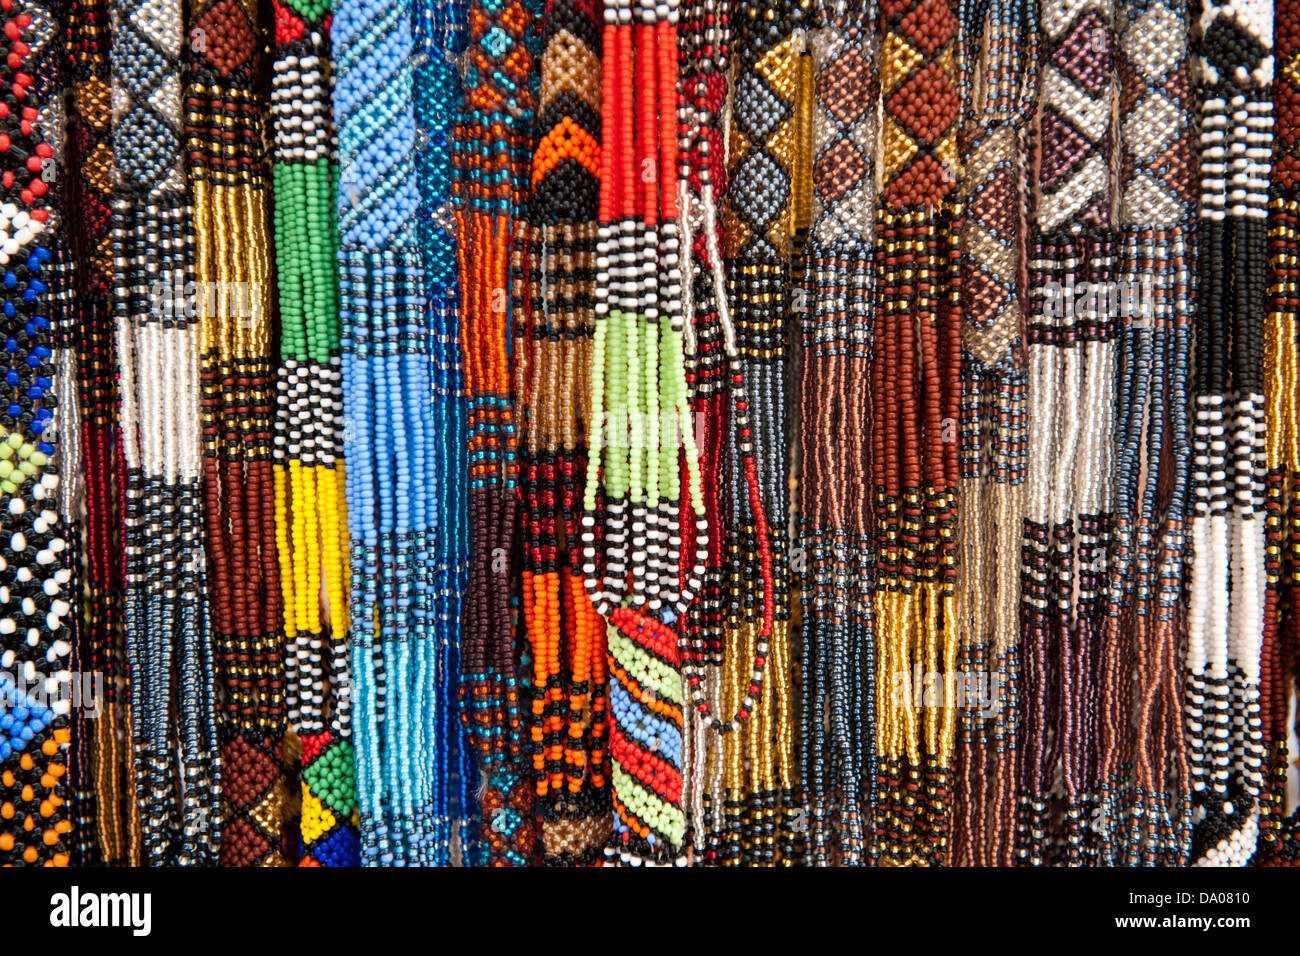 African Beads High Resolution Stock Photography and Images - Alamy